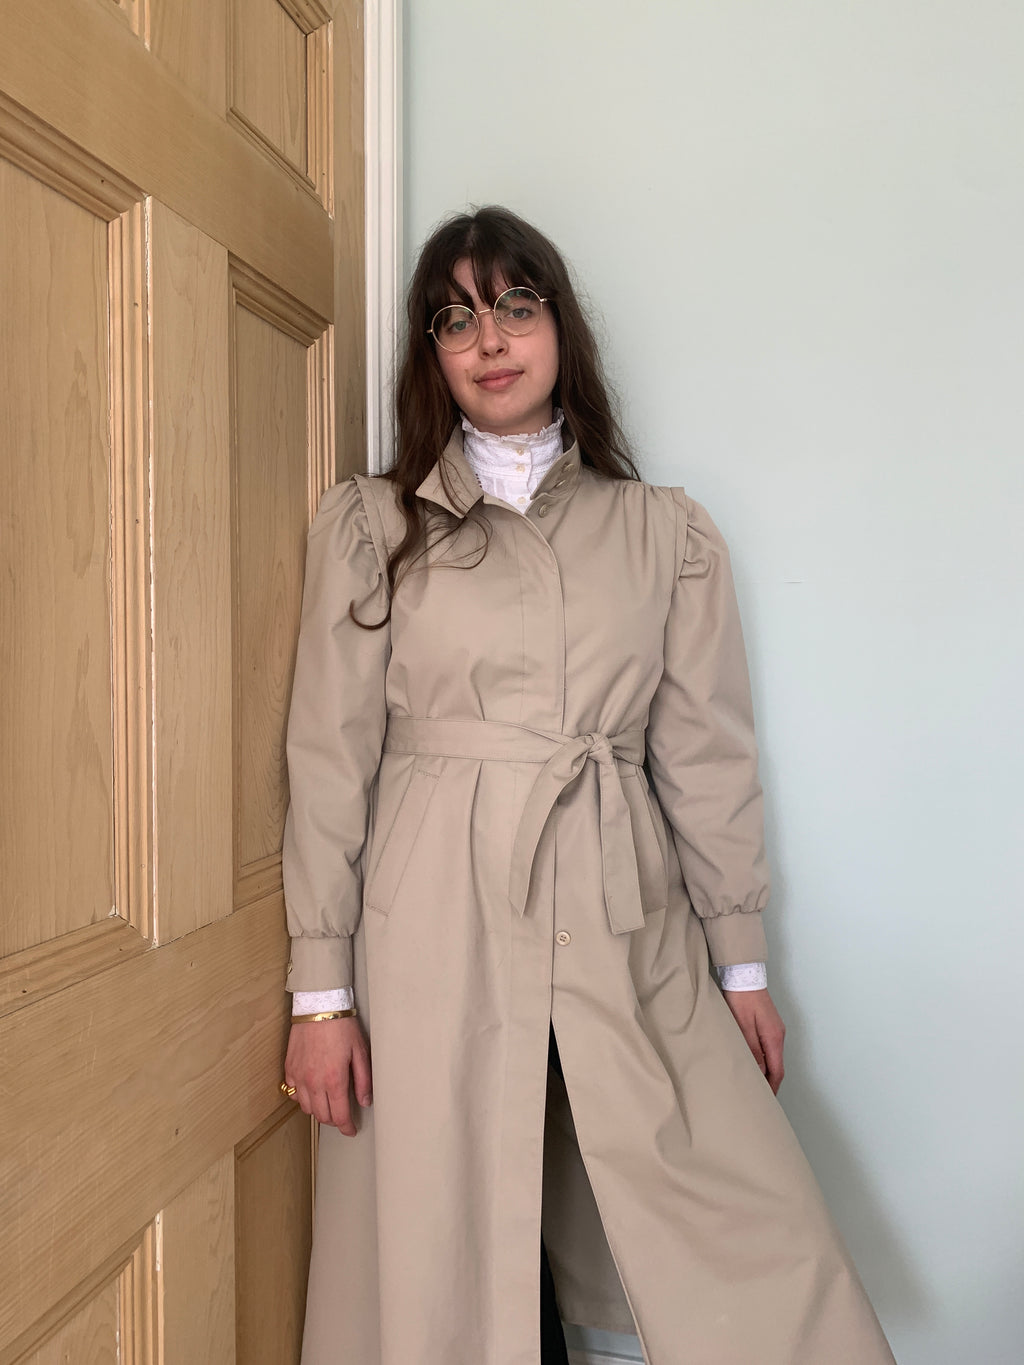 Beautiful vintage trench coat